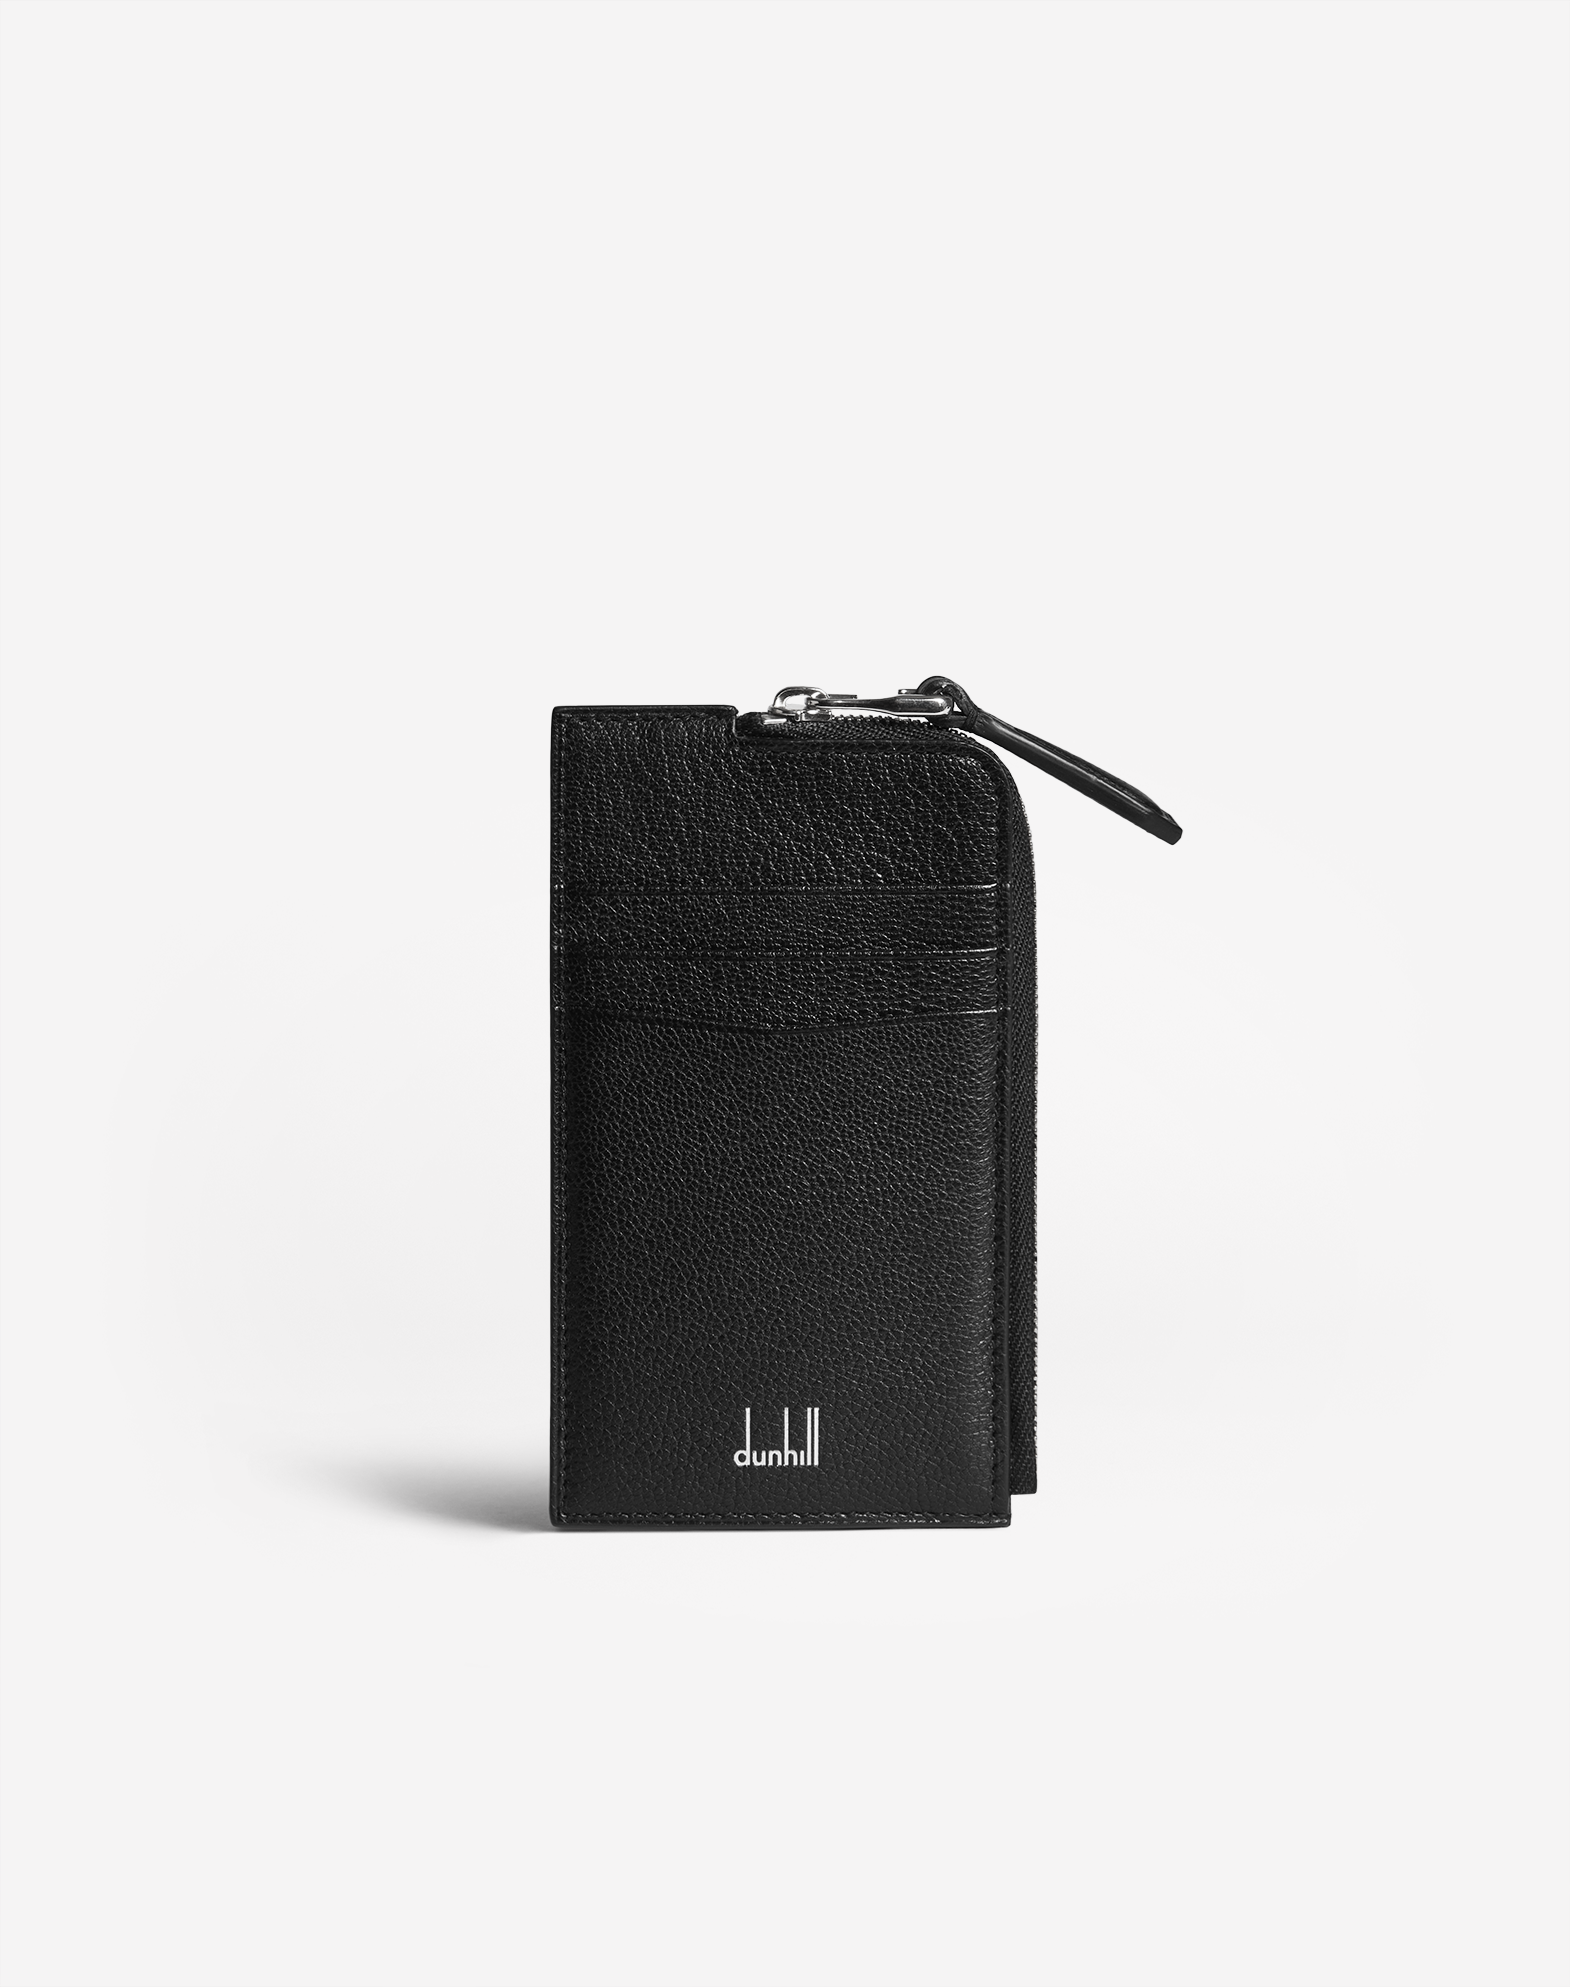 Dunhill Luxury Men's Card Cases